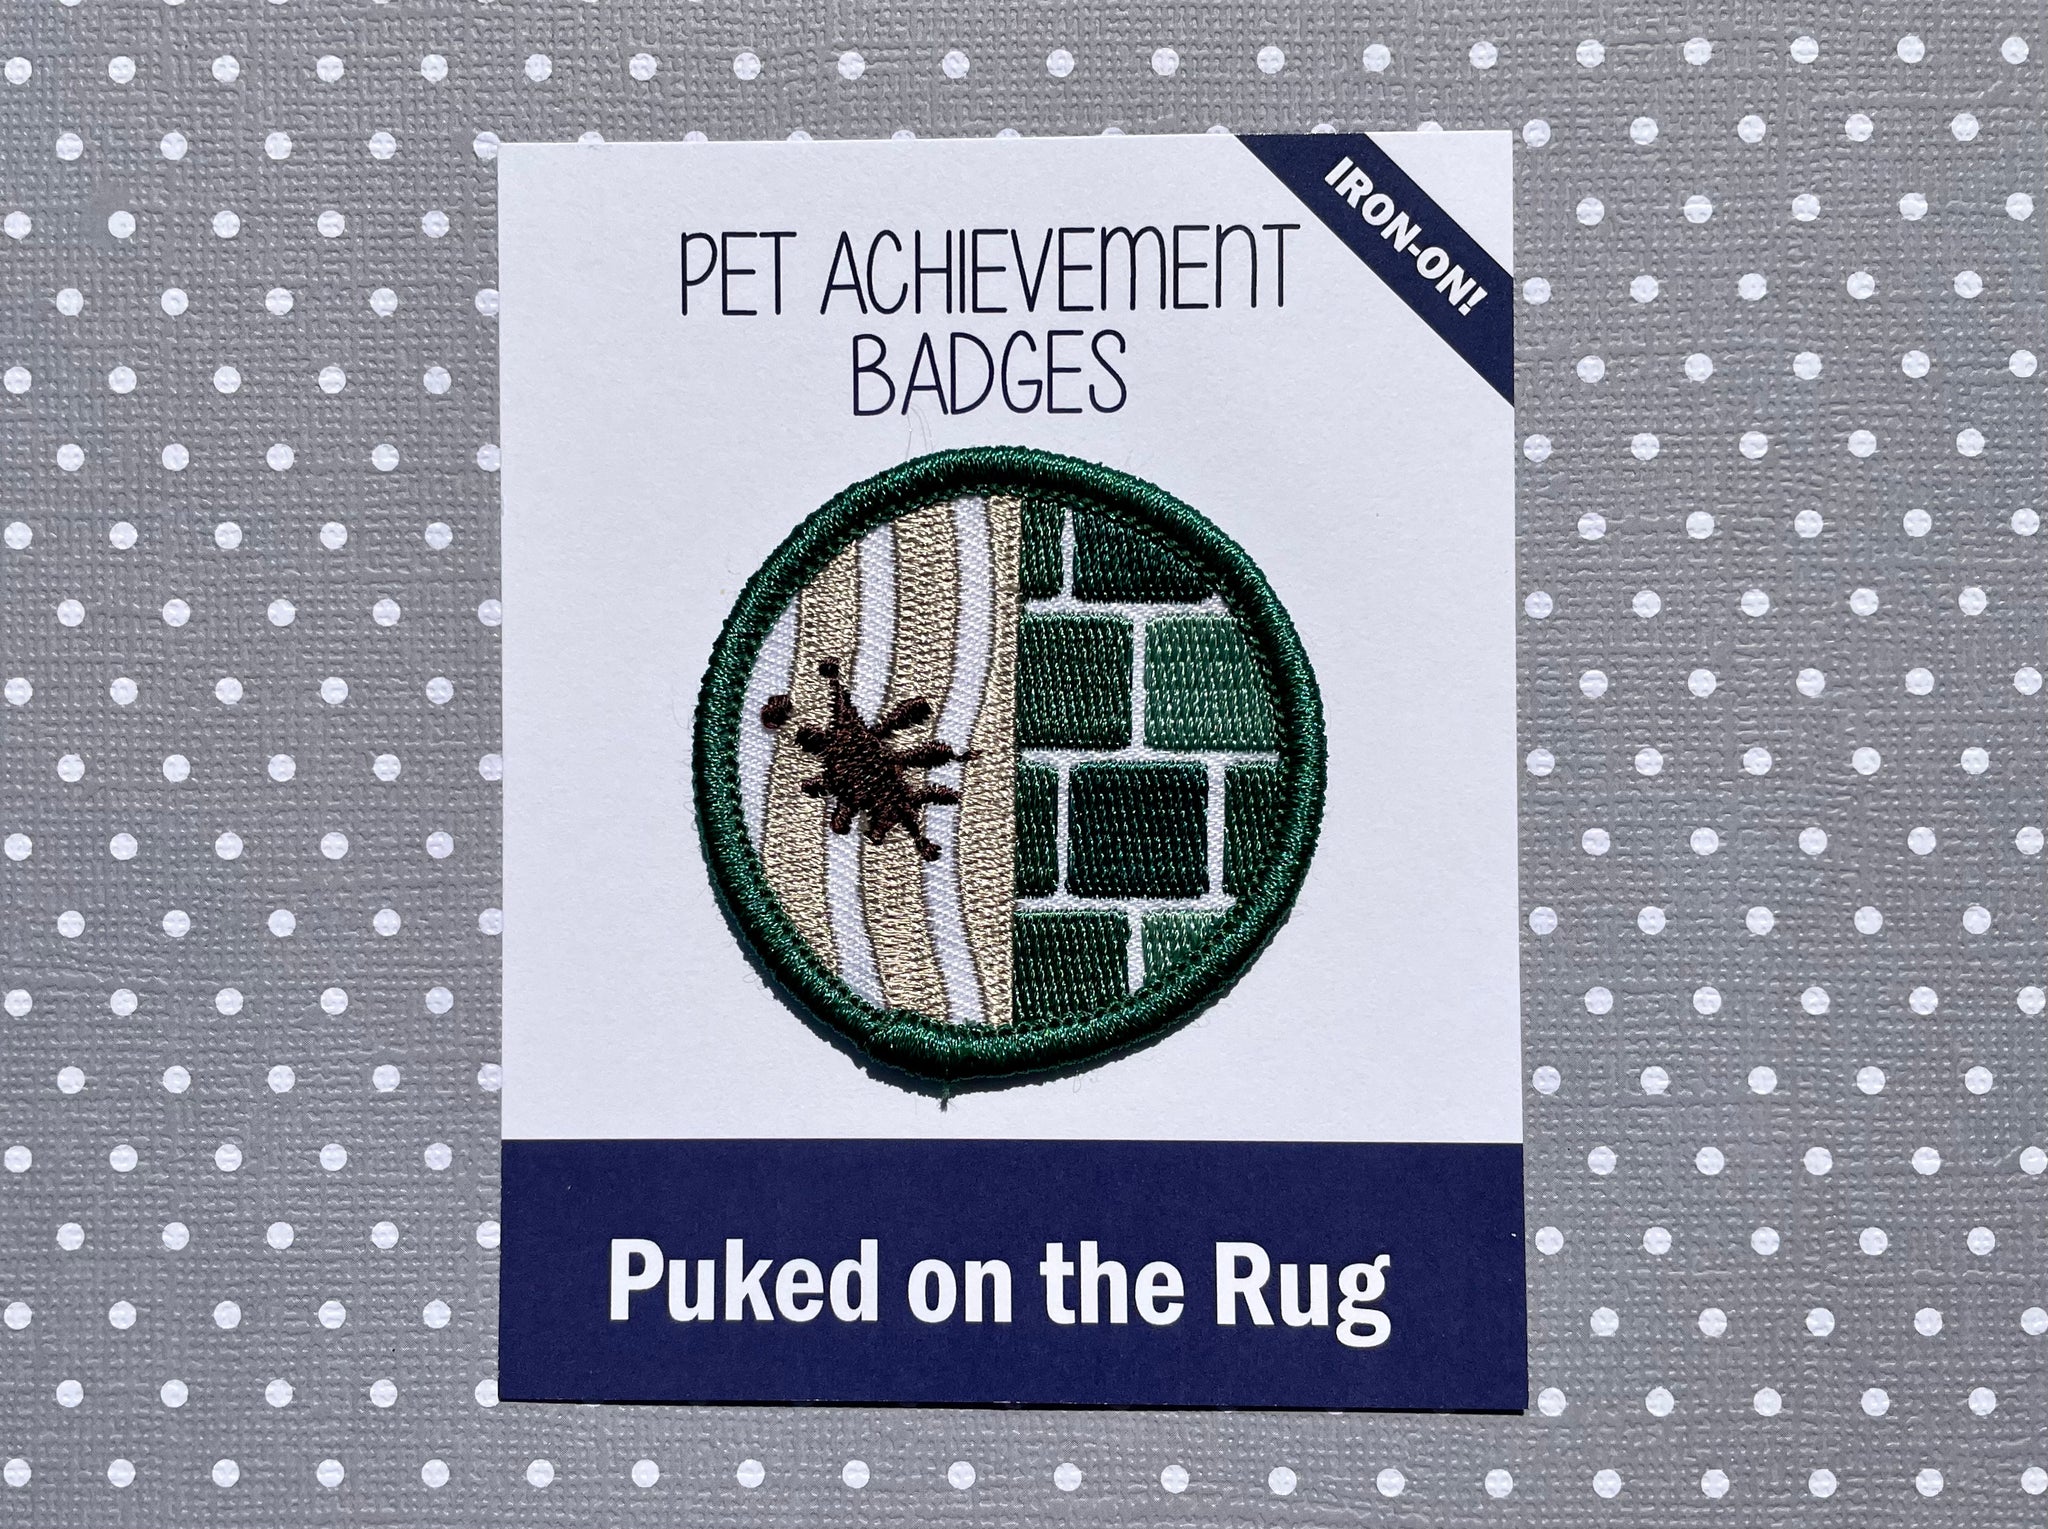 Puked on the Rug, Pet Achievement Badge